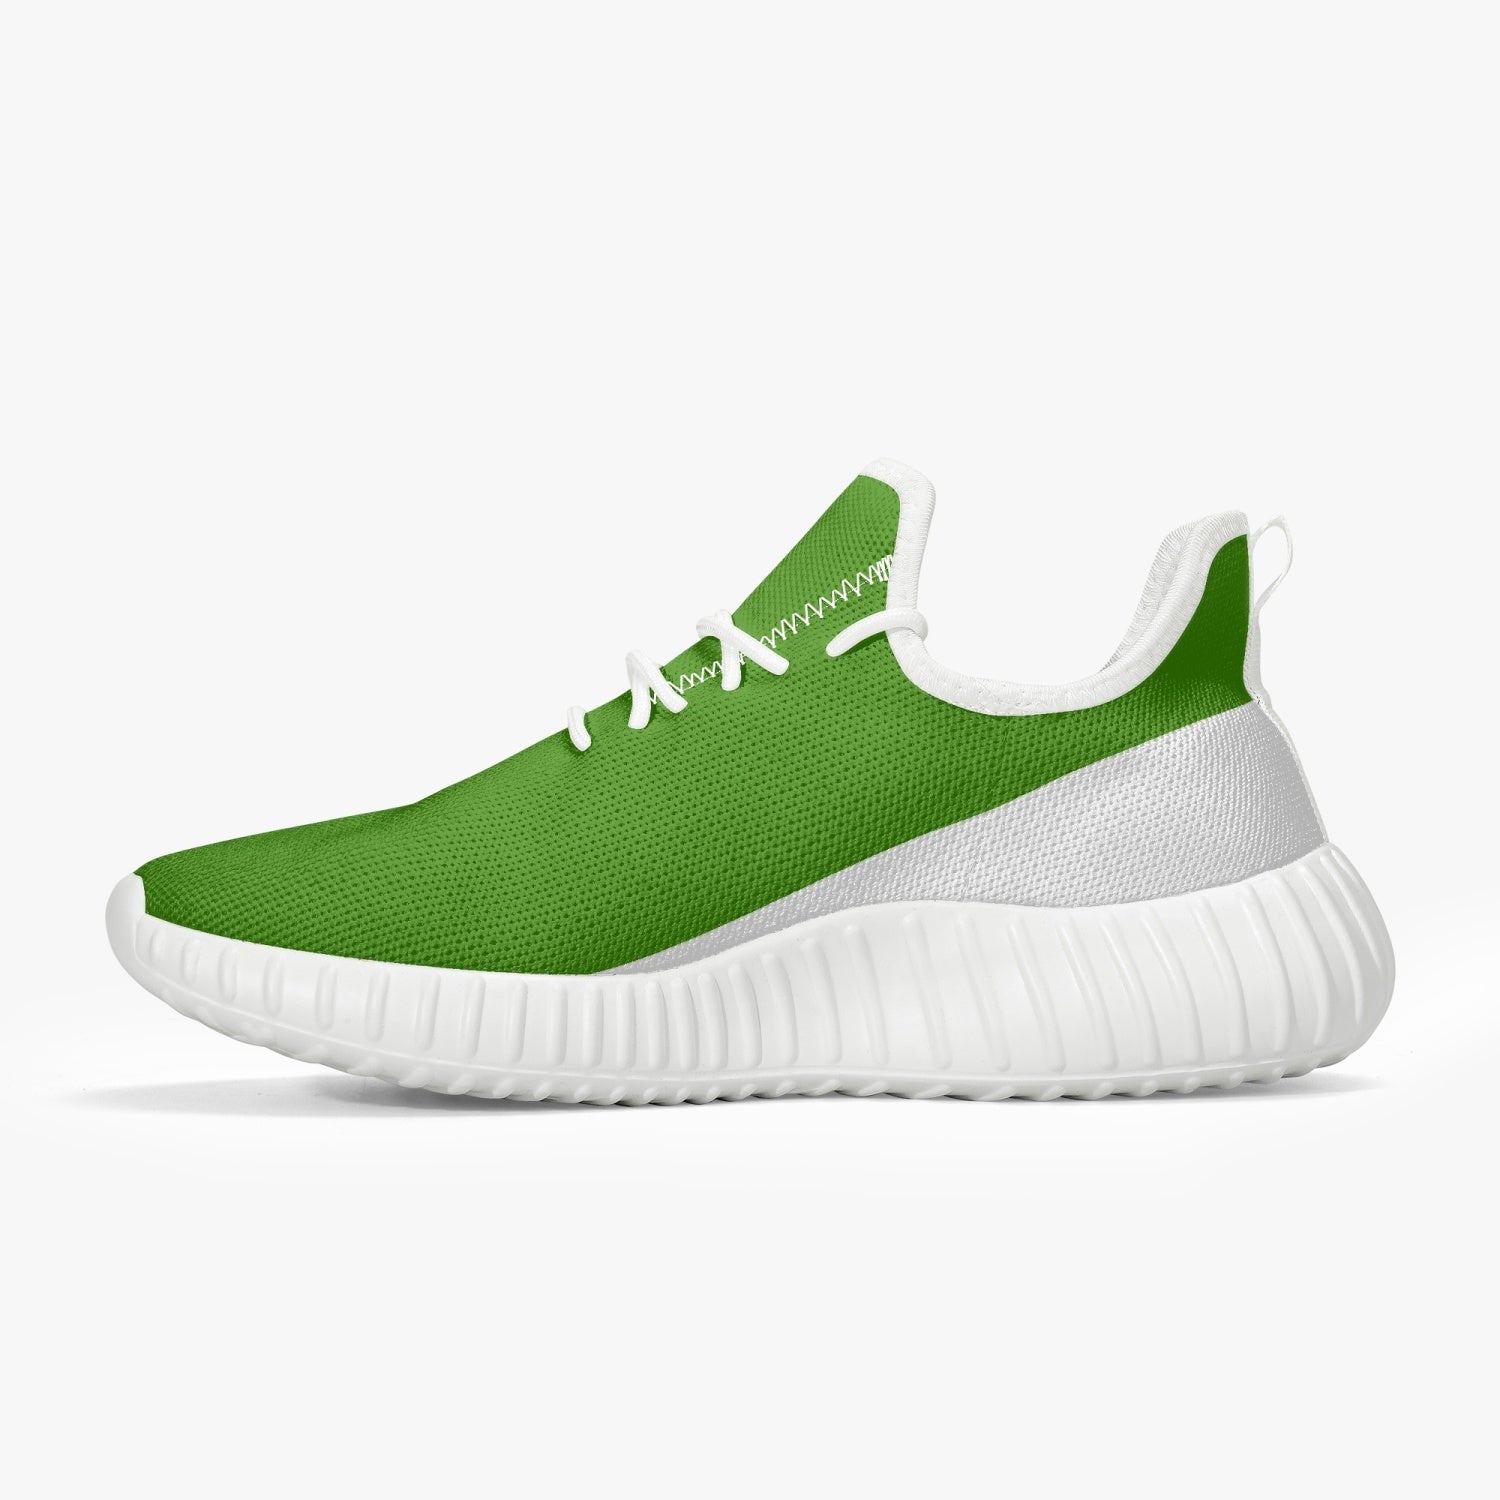 Officially Sexy Green & White Laser Mesh Knit Sneakers - With White or Black Sole